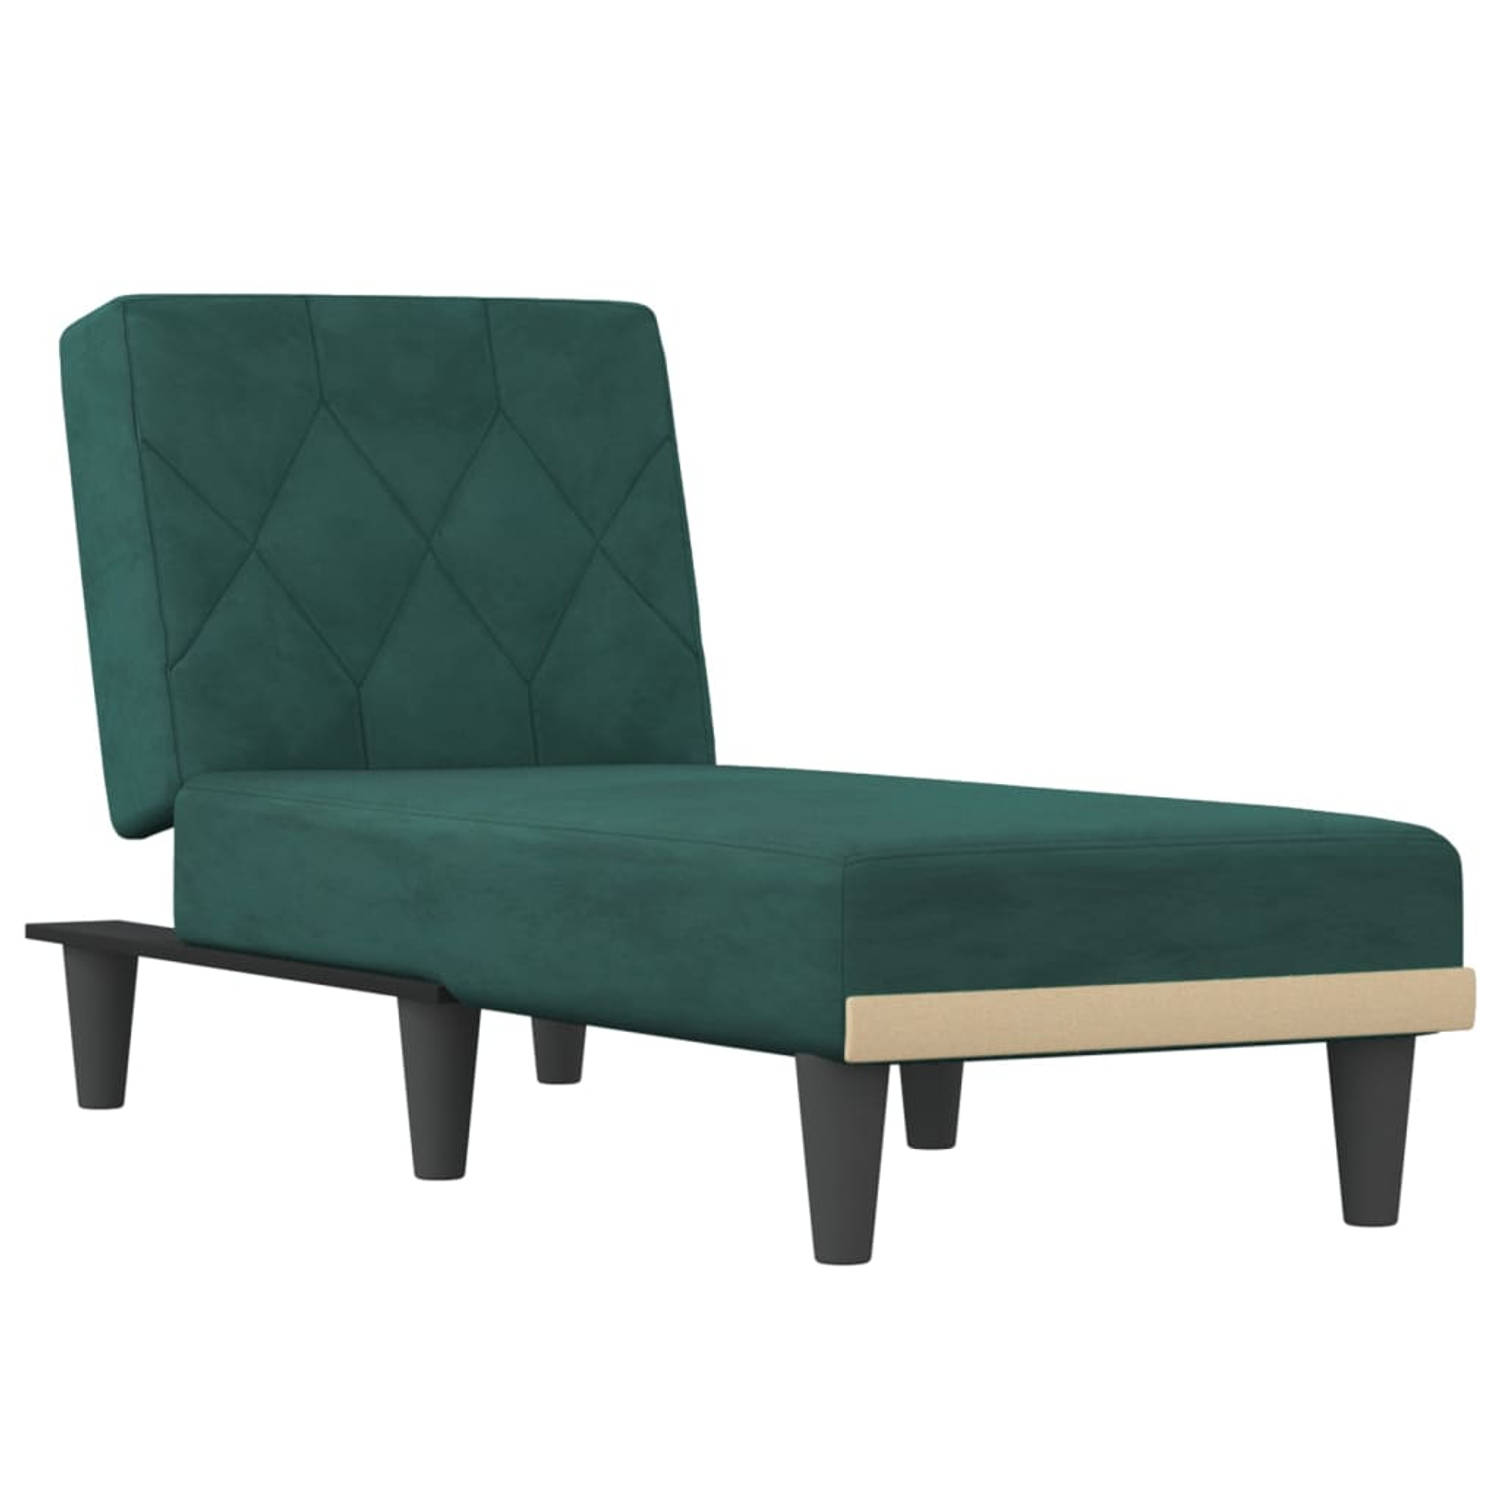 The Living Store Chaise longue fluweel donkergroen - Chaise longue